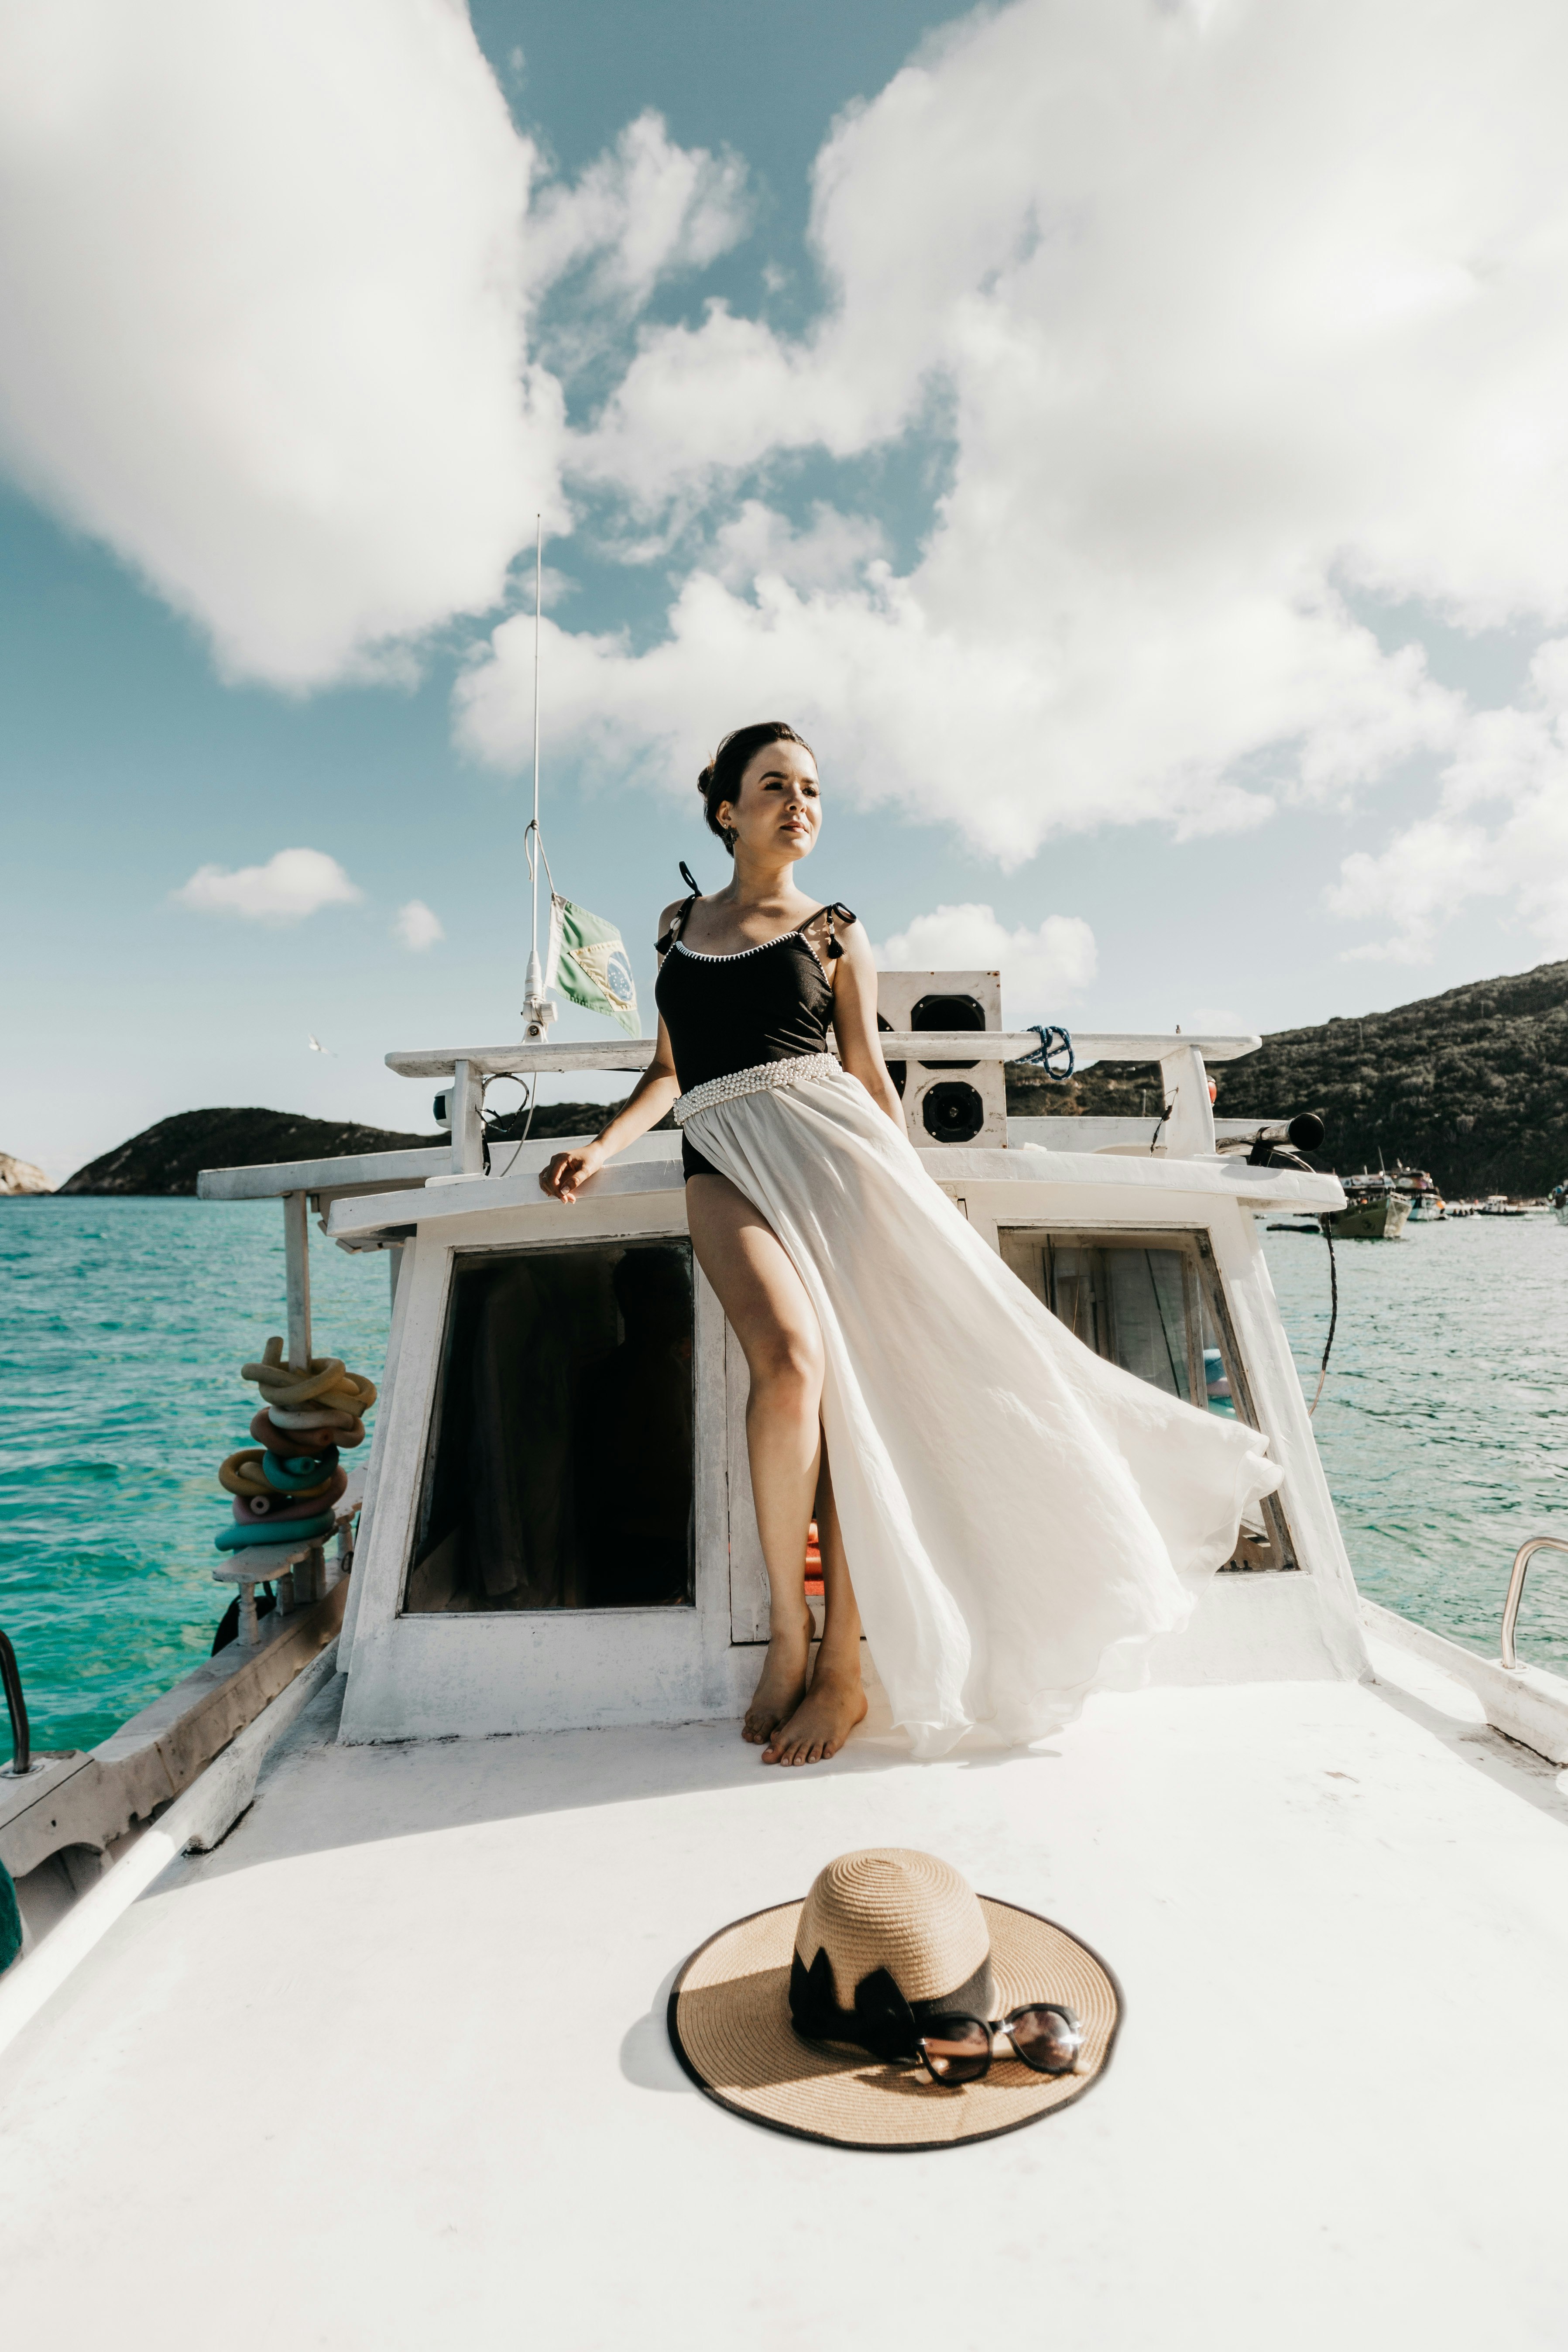 woman in white dress standing on white boat during daytime